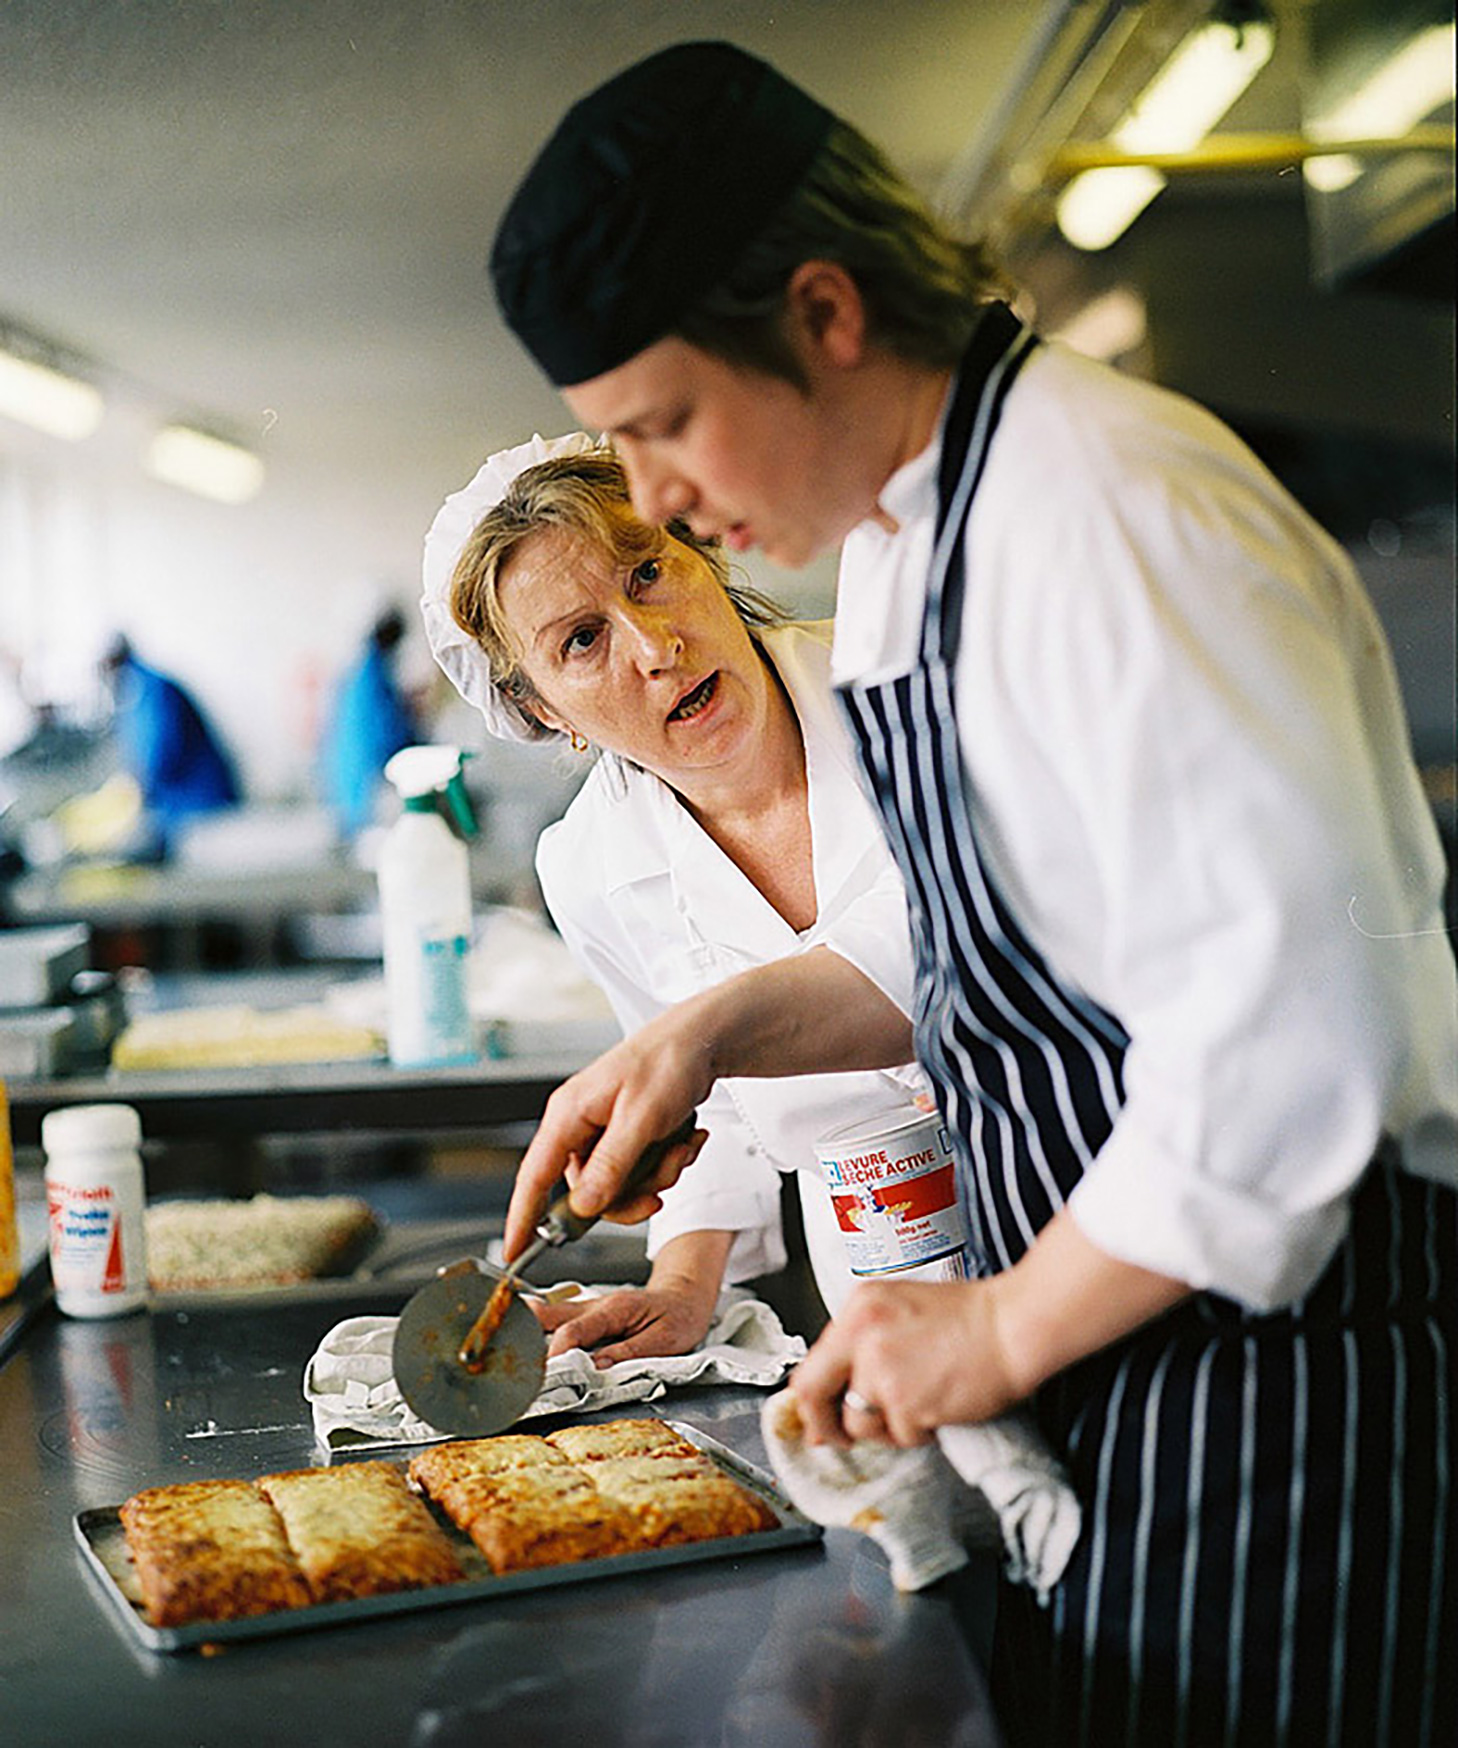 Jamie launched a better school meals campaign in 2005